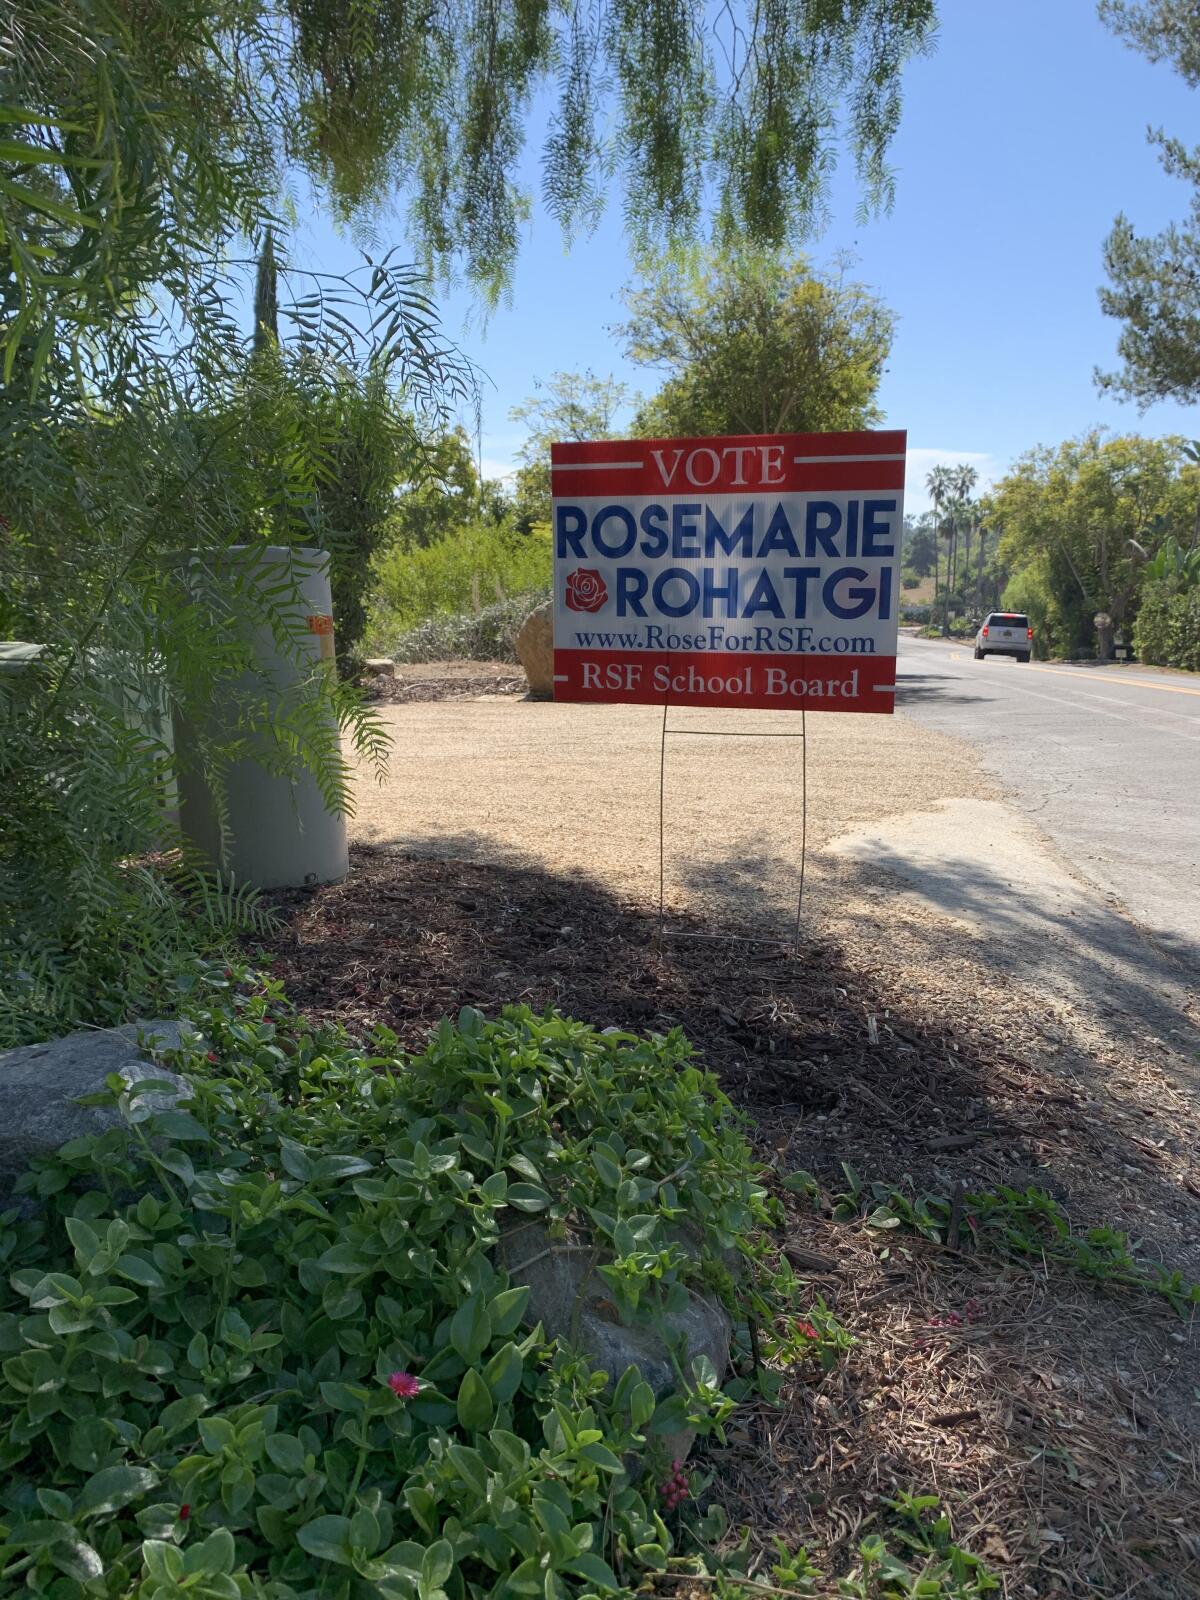 RSF School board candidate Rosemarie Rohatgi had 25 signs stolen during the election season.